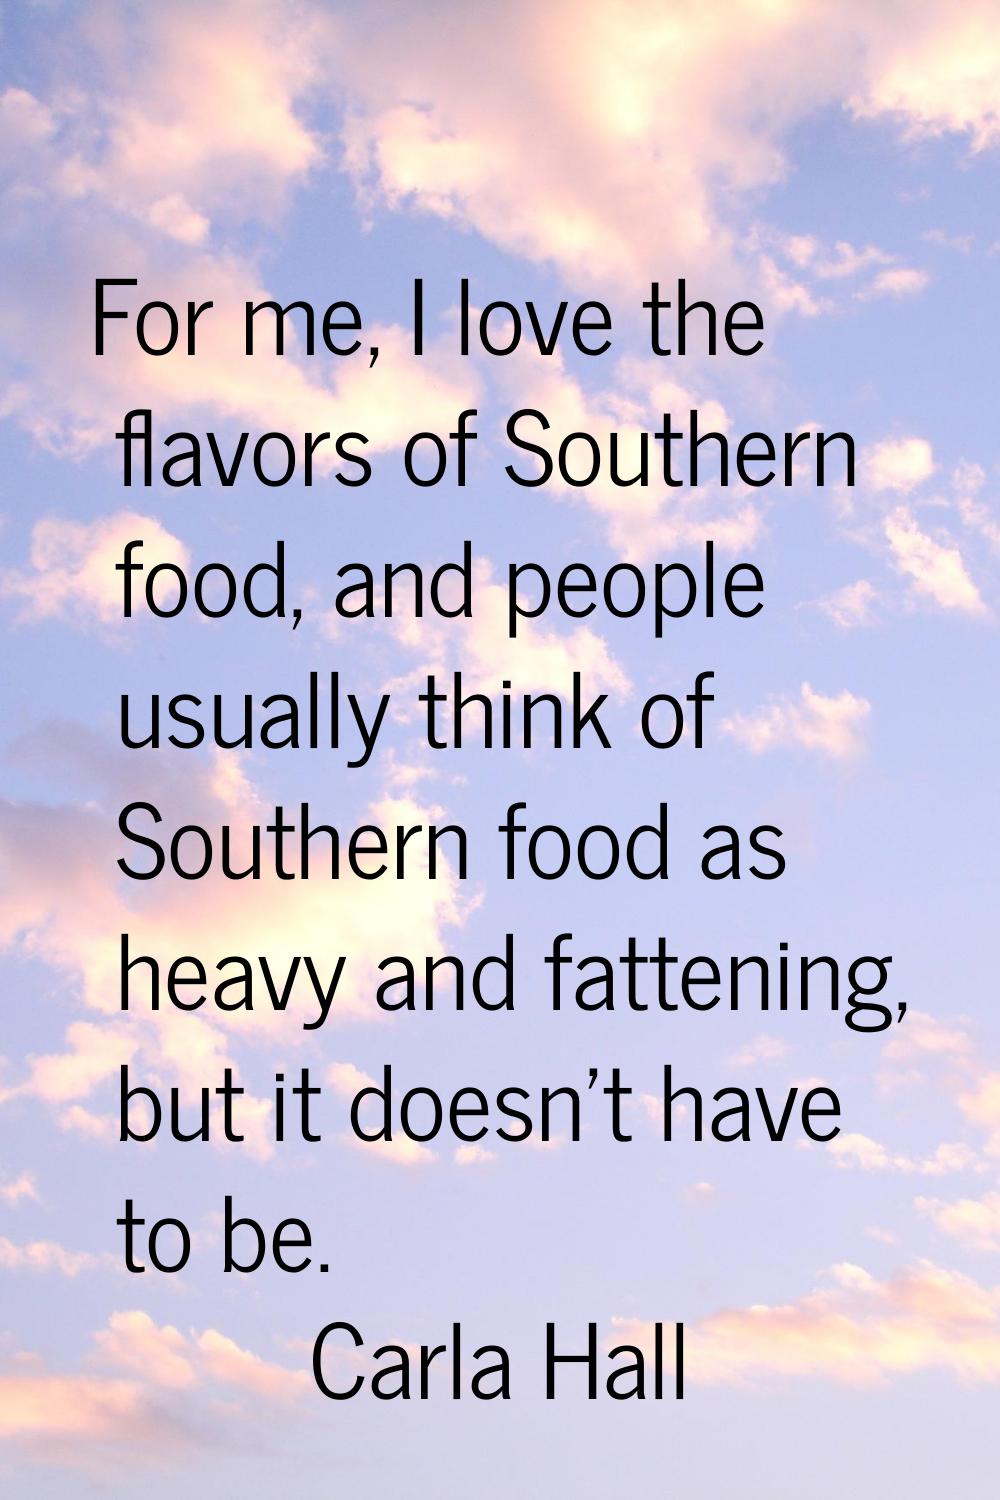 For me, I love the flavors of Southern food, and people usually think of Southern food as heavy and